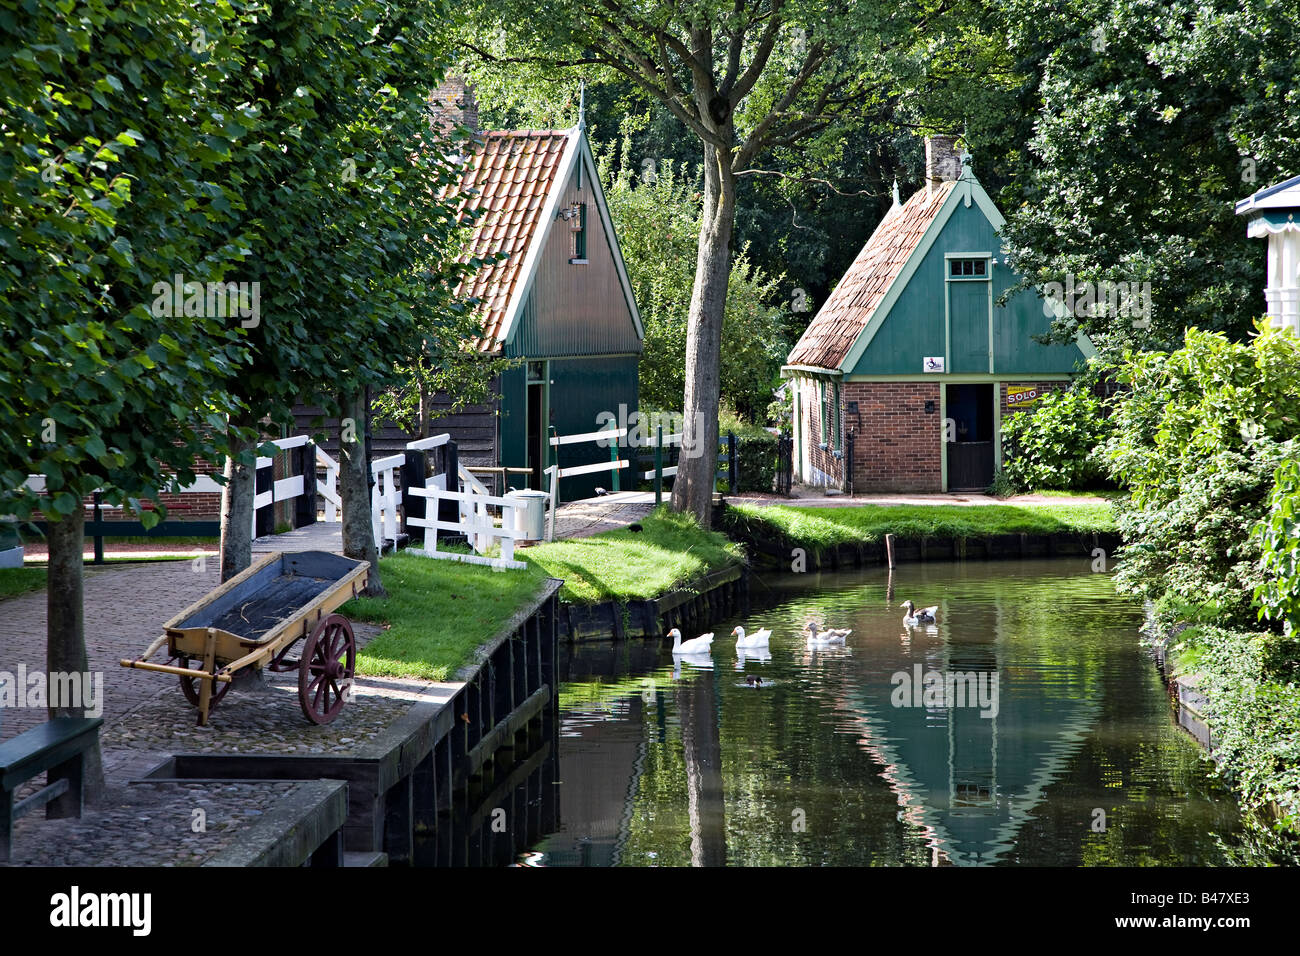 Canal and old buildings in folk museum Zuiderzeemuseum Enkhuizen Netherlands Stock Photo